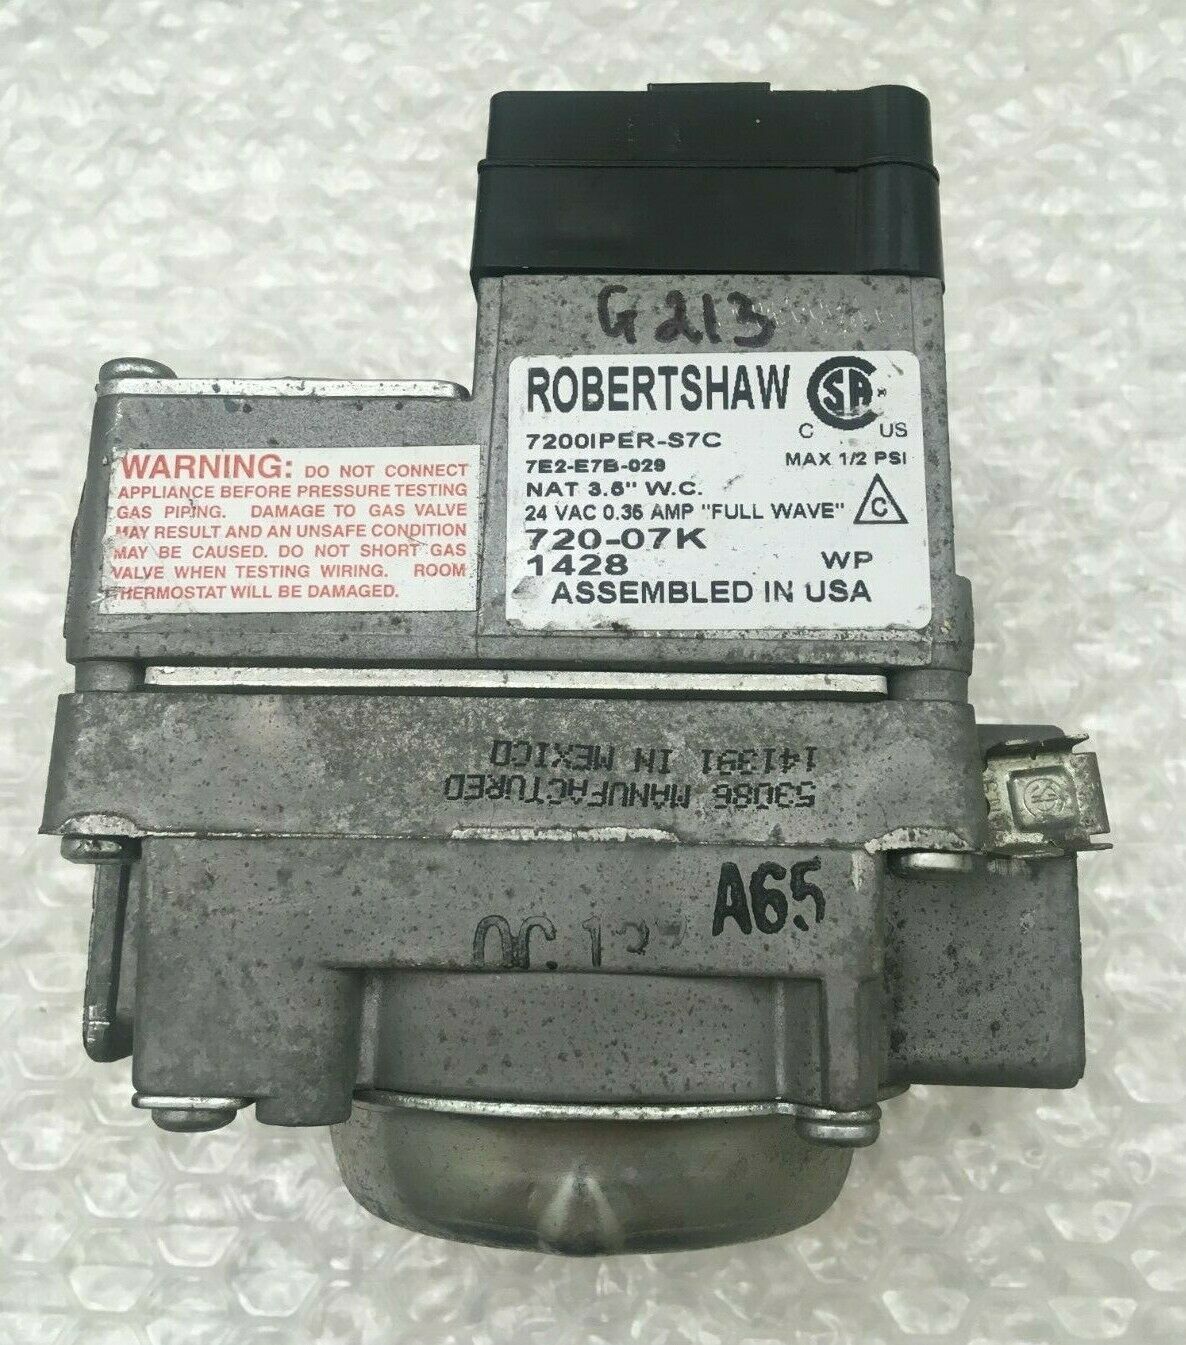 Primary image for Robertshaw 7200IPER-S7C 7E2-E7B-029 Furnace Gas Valve used FREE shipping #G213*